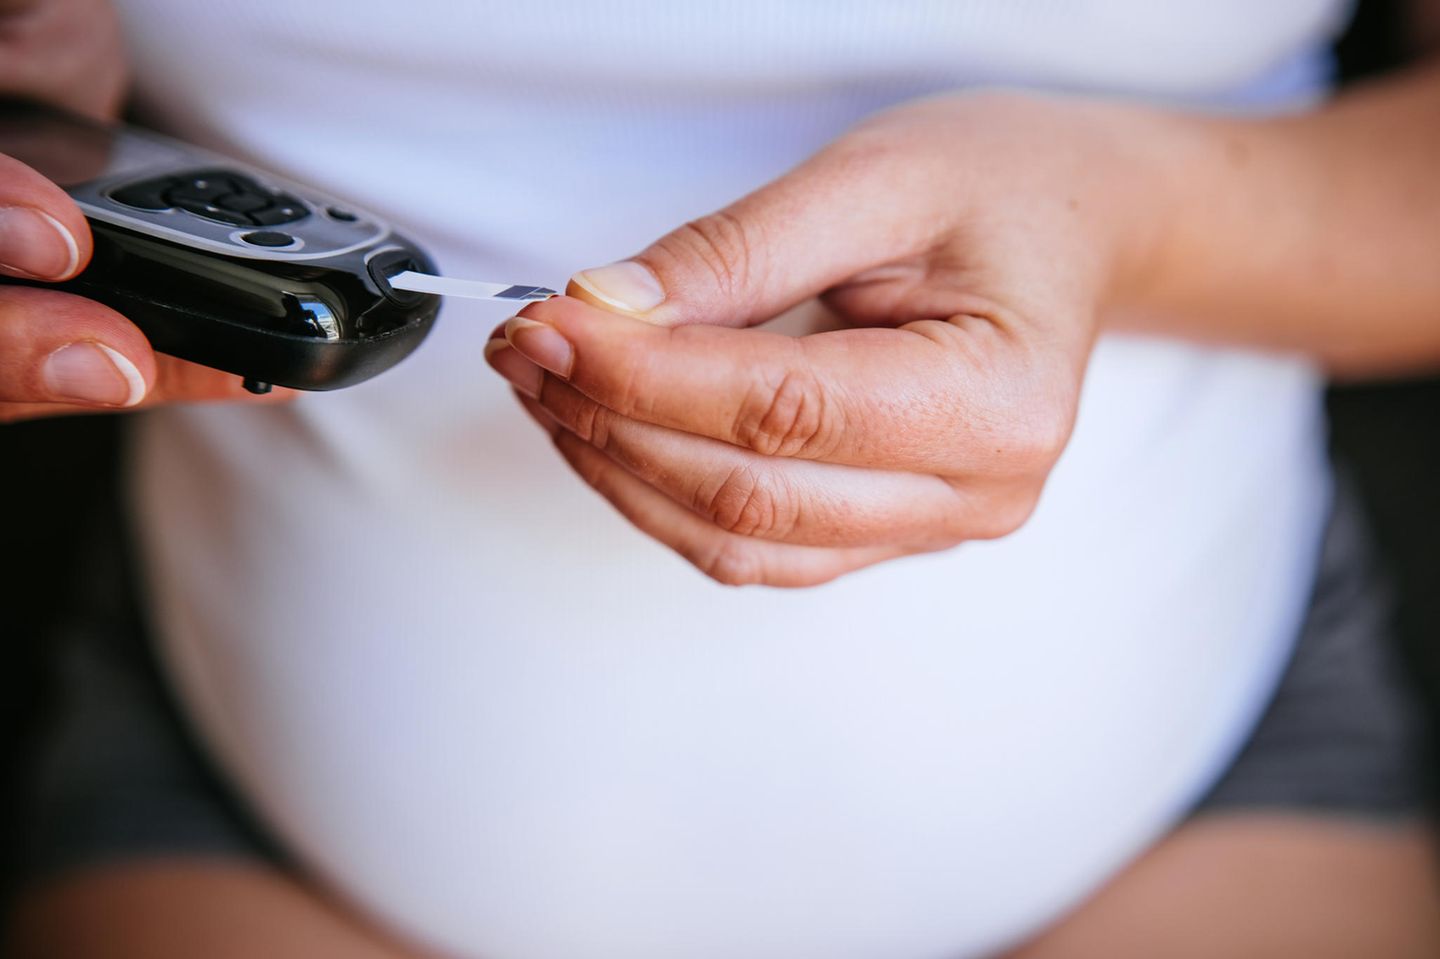 Study clarifies: Pregnant measures with a glucometer